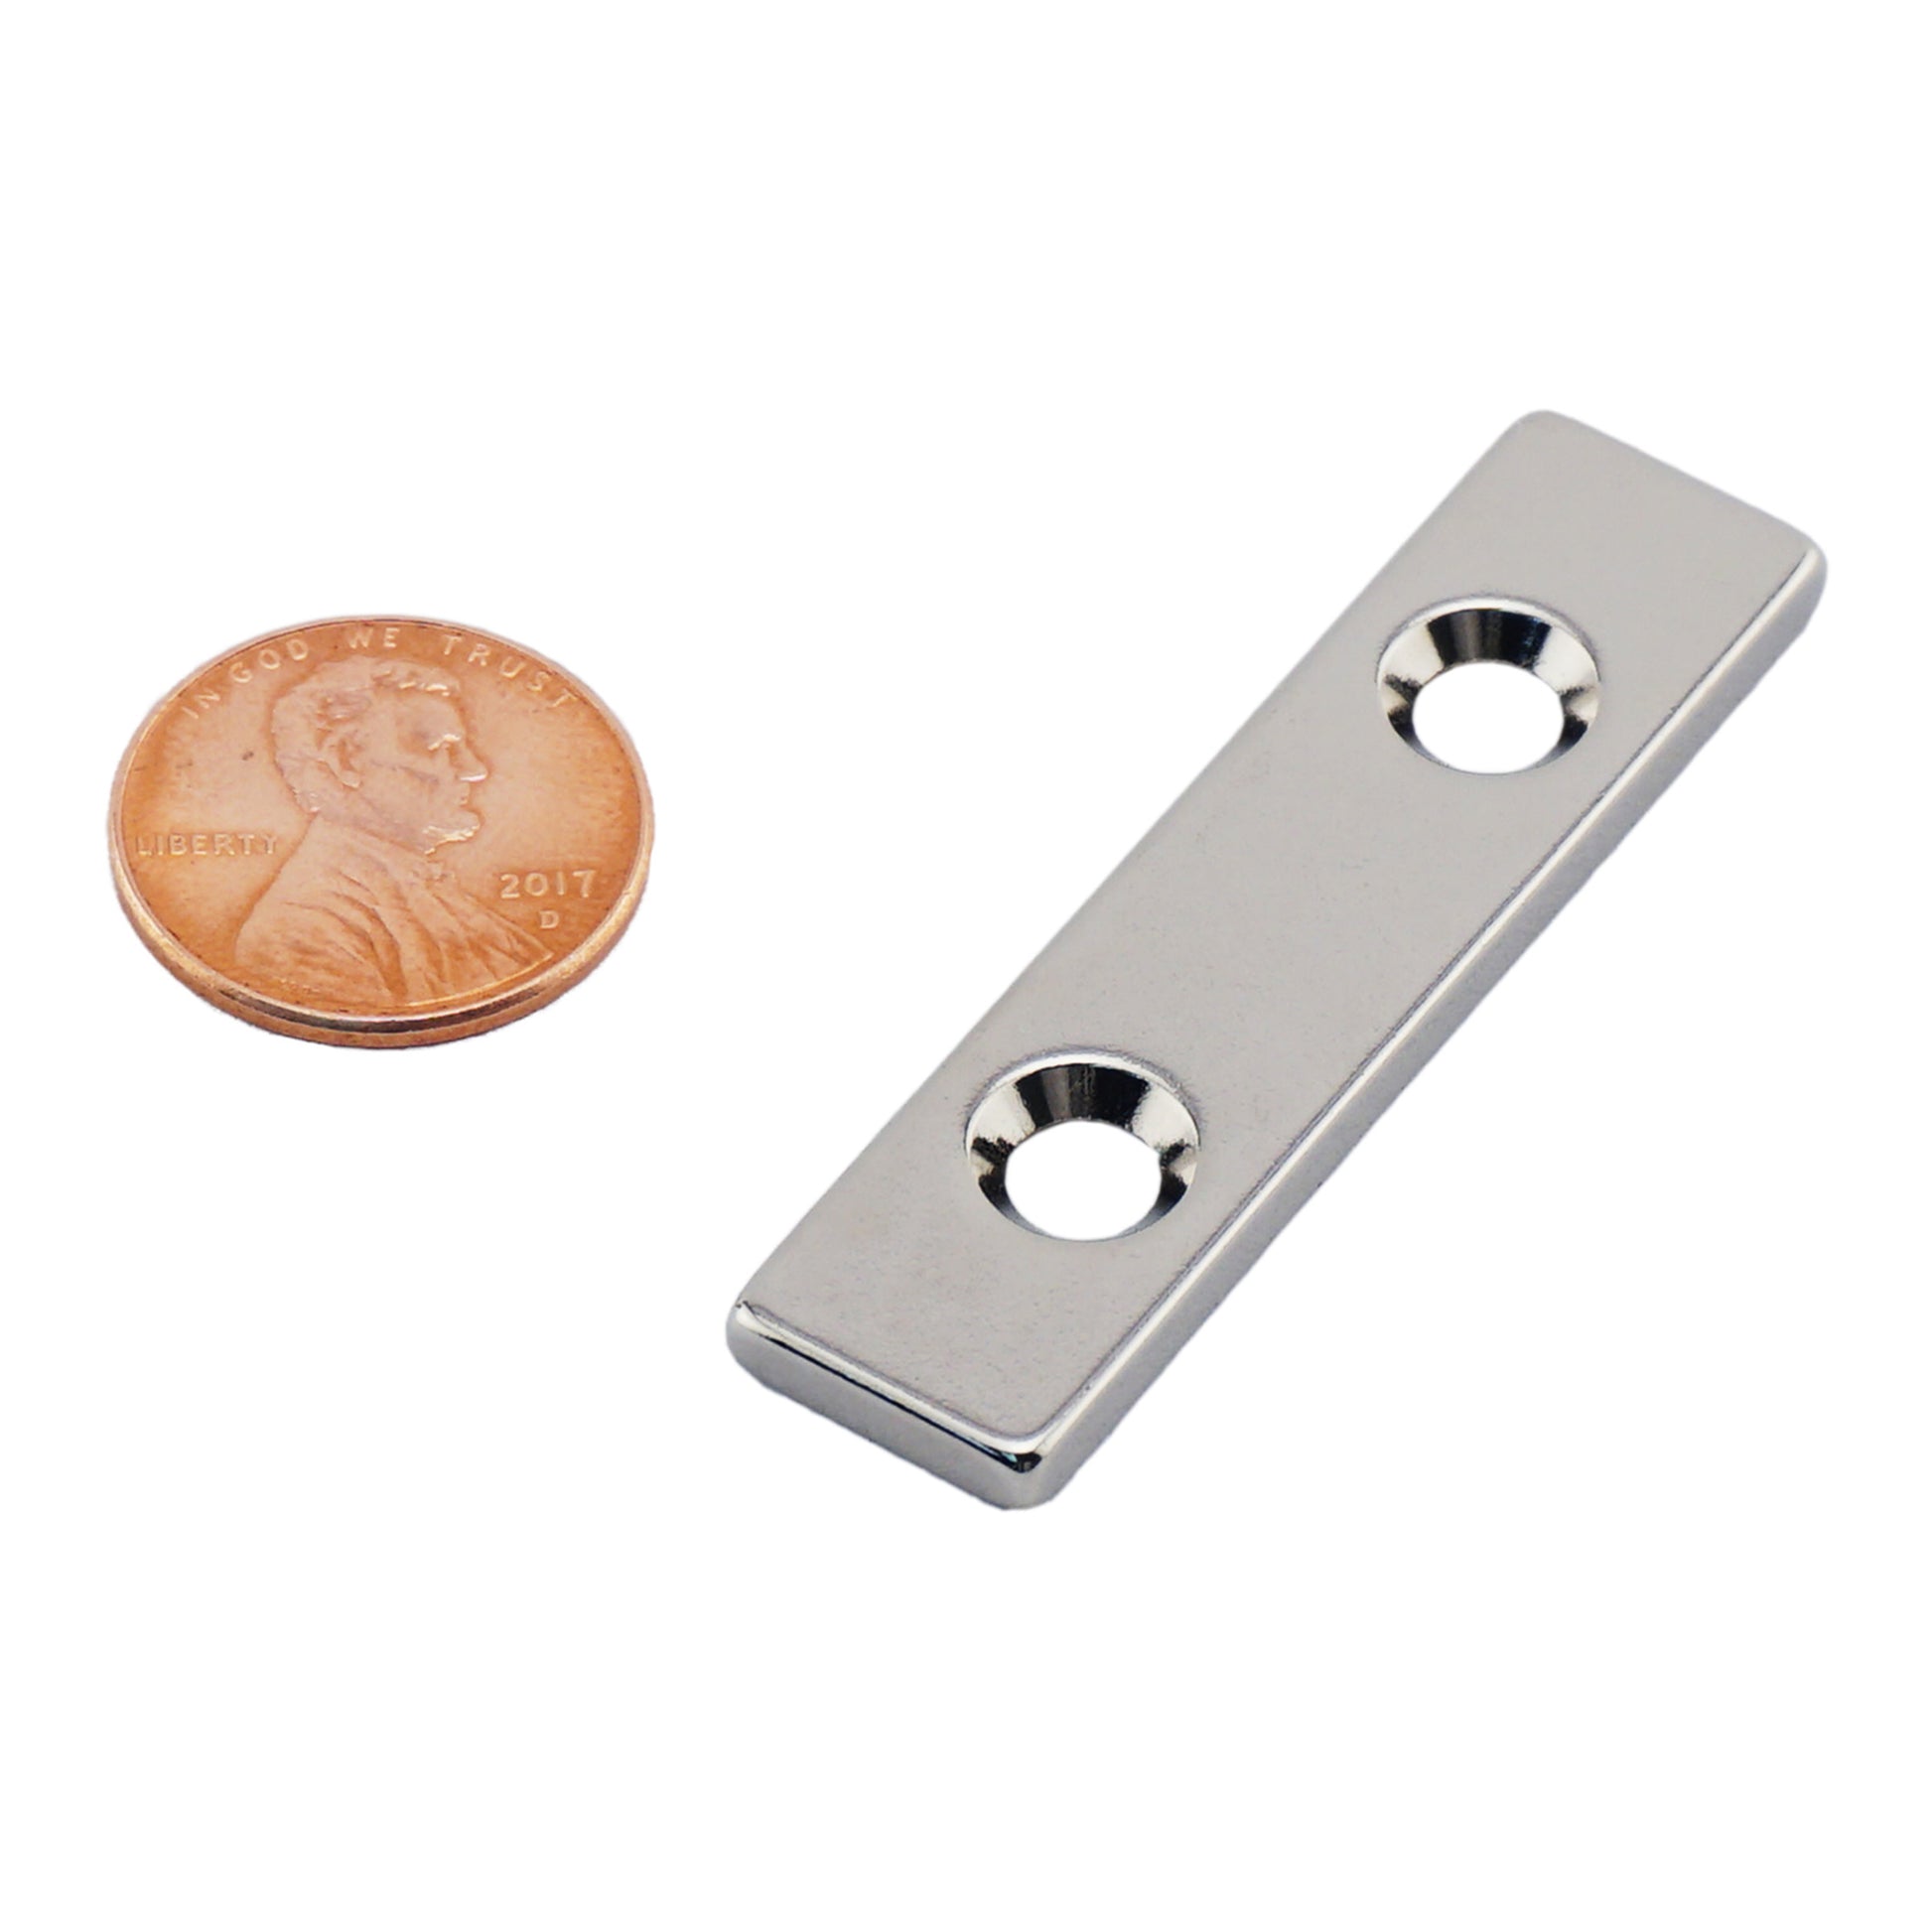 Load image into Gallery viewer, NB001221NCTSX2 Neodymium Countersunk Block Magnet - Compared to Penny for Size Reference